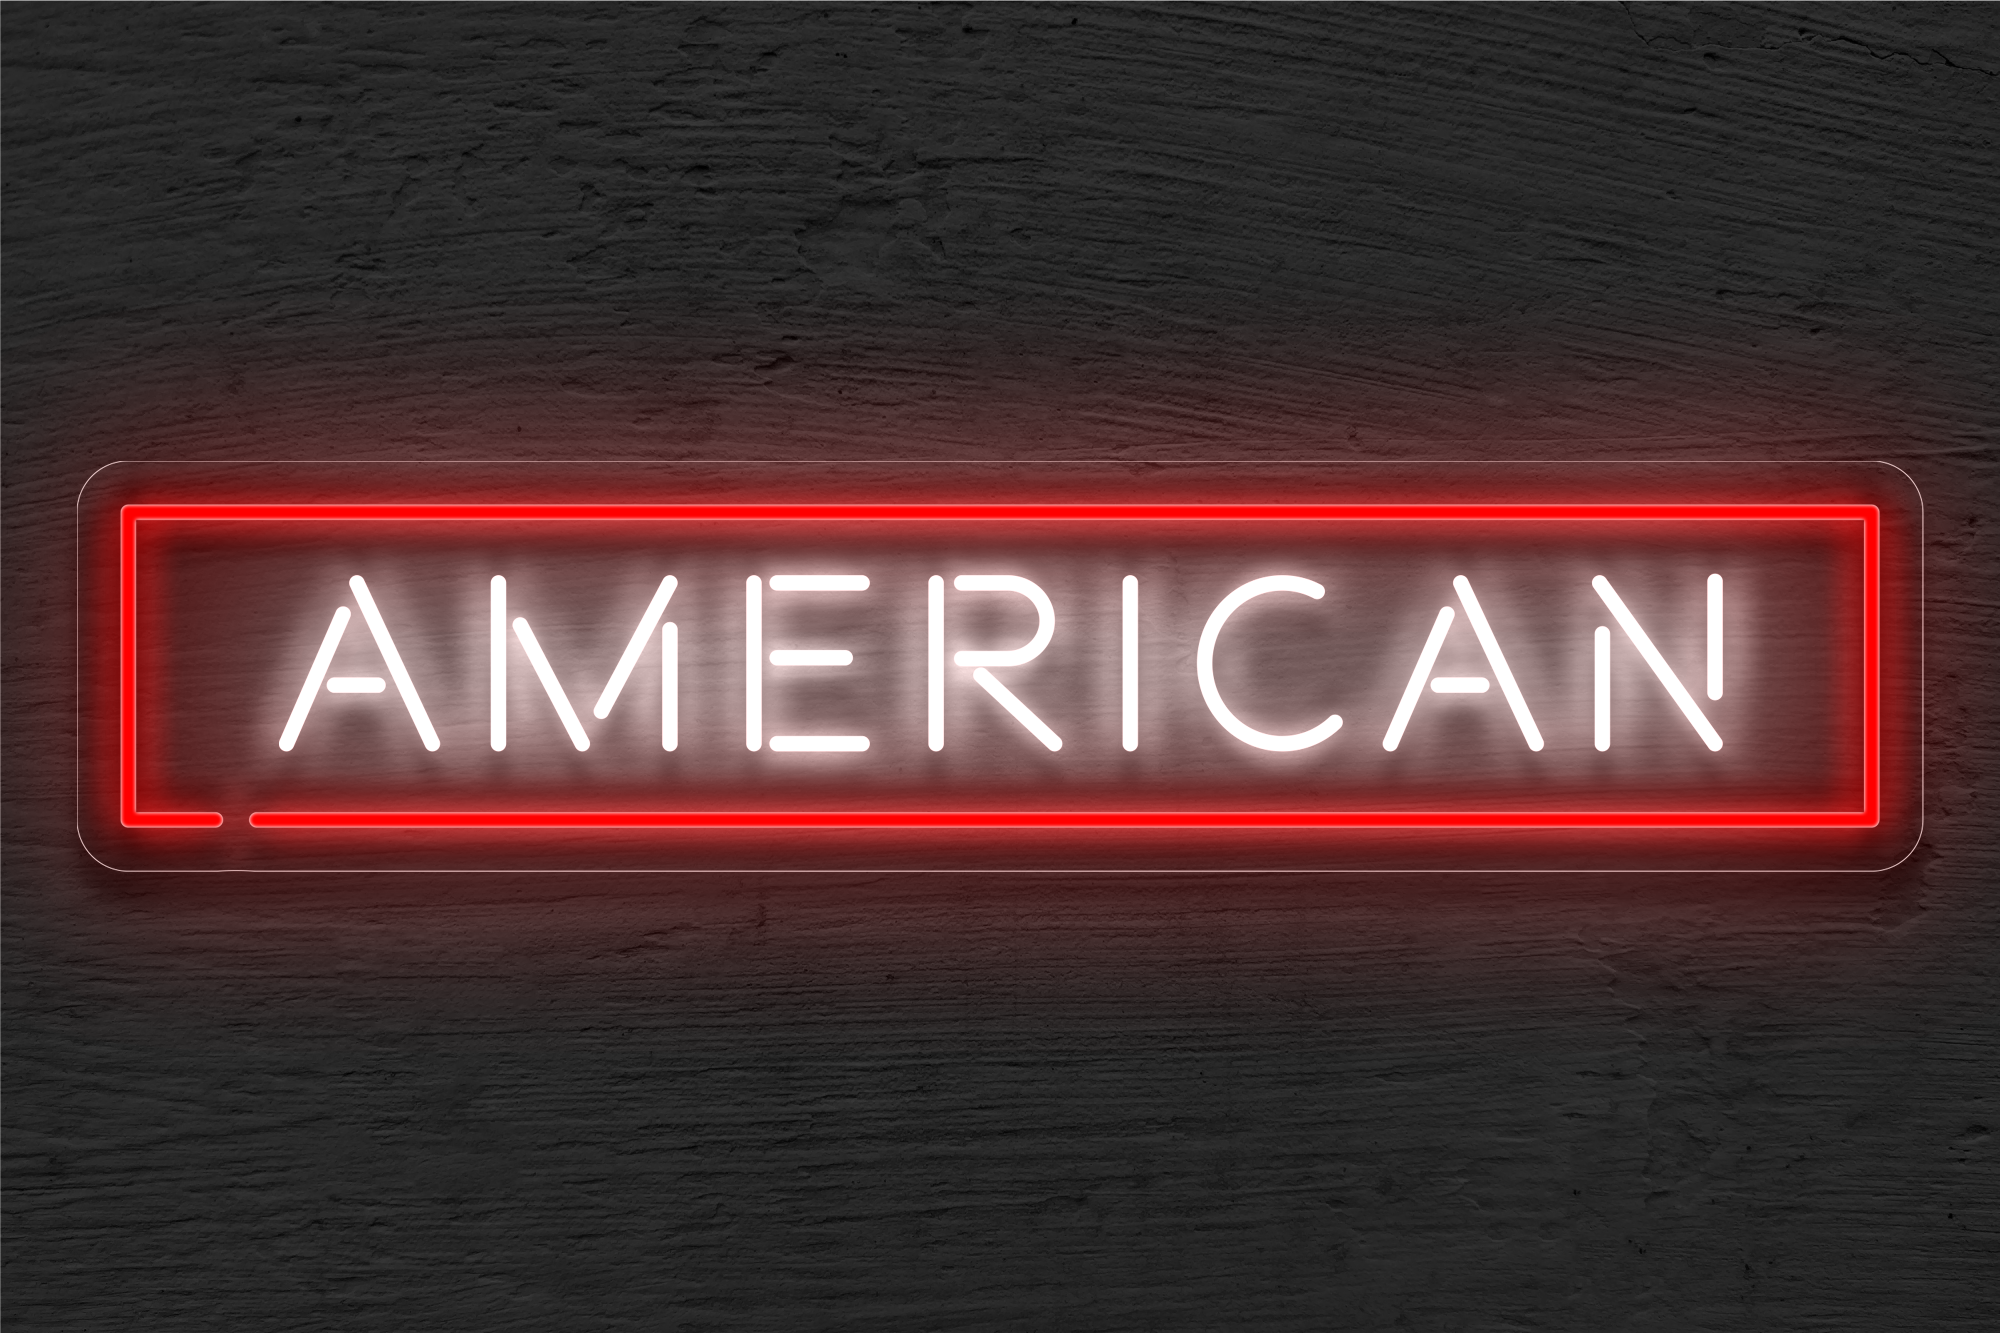 "American" with Border LED Neon Sign